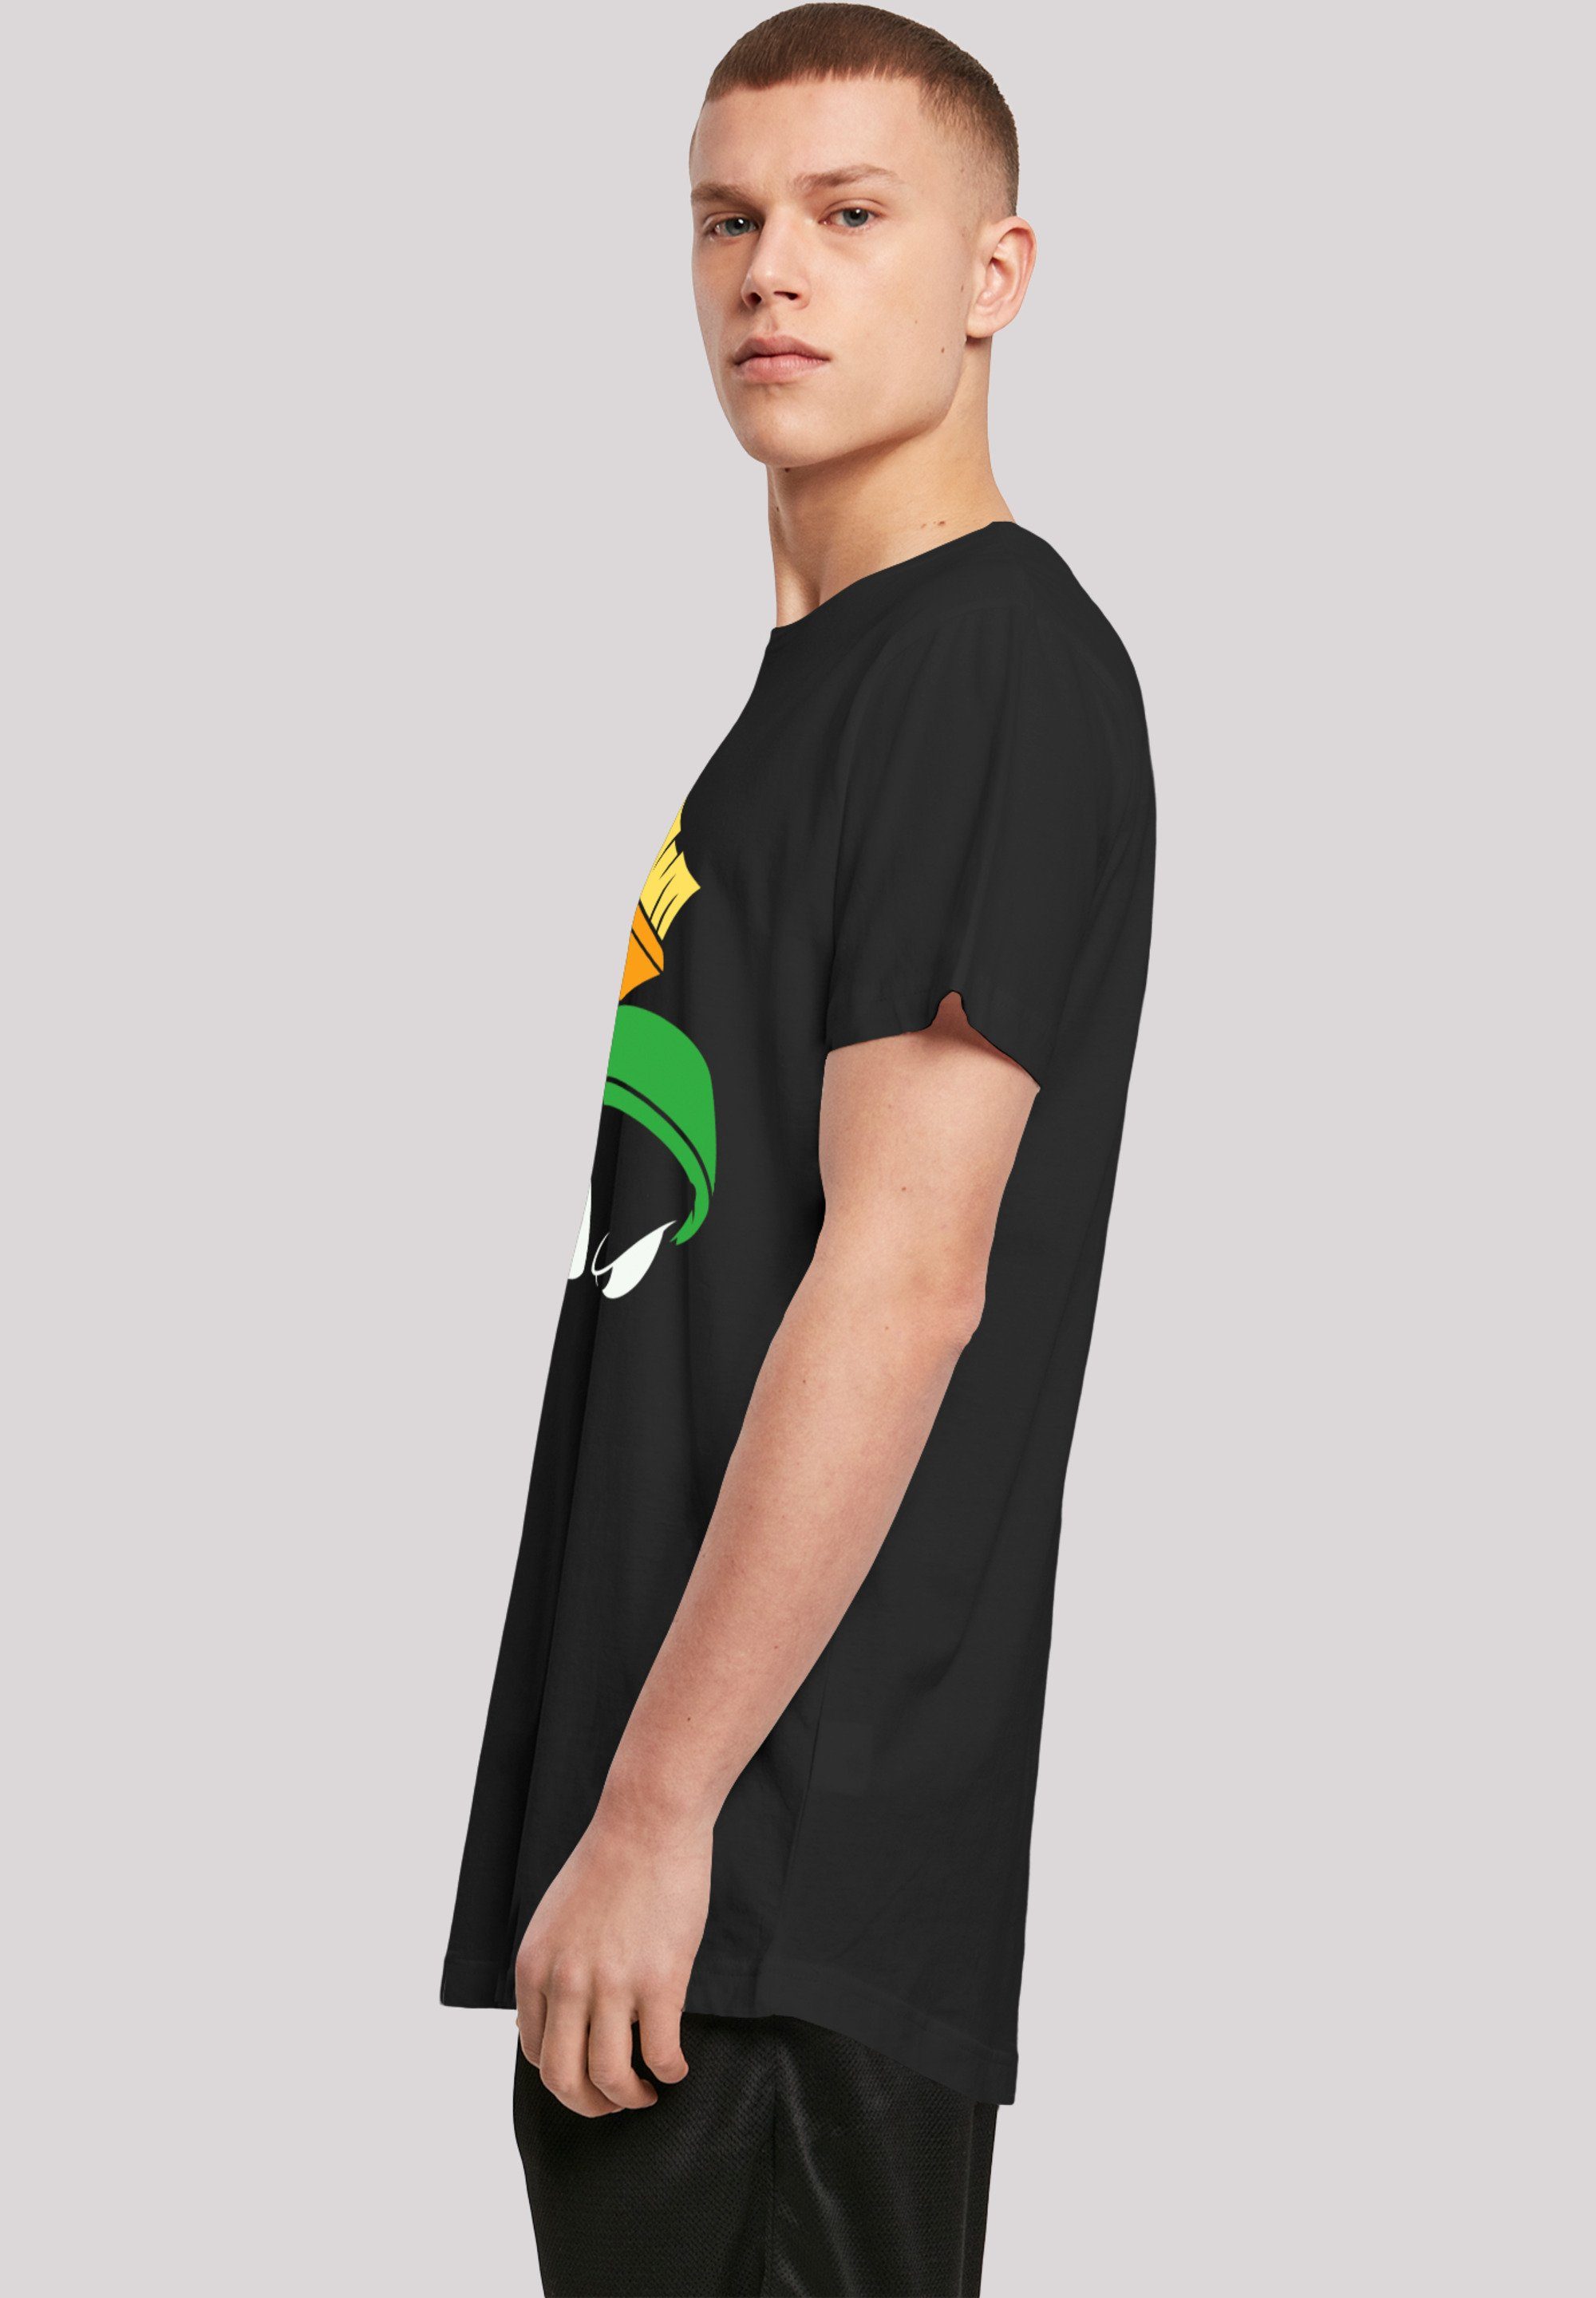 F4NT4STIC Kurzarmshirt with Herren (1-tlg) The Marvin Shaped Martian Long Face Tee